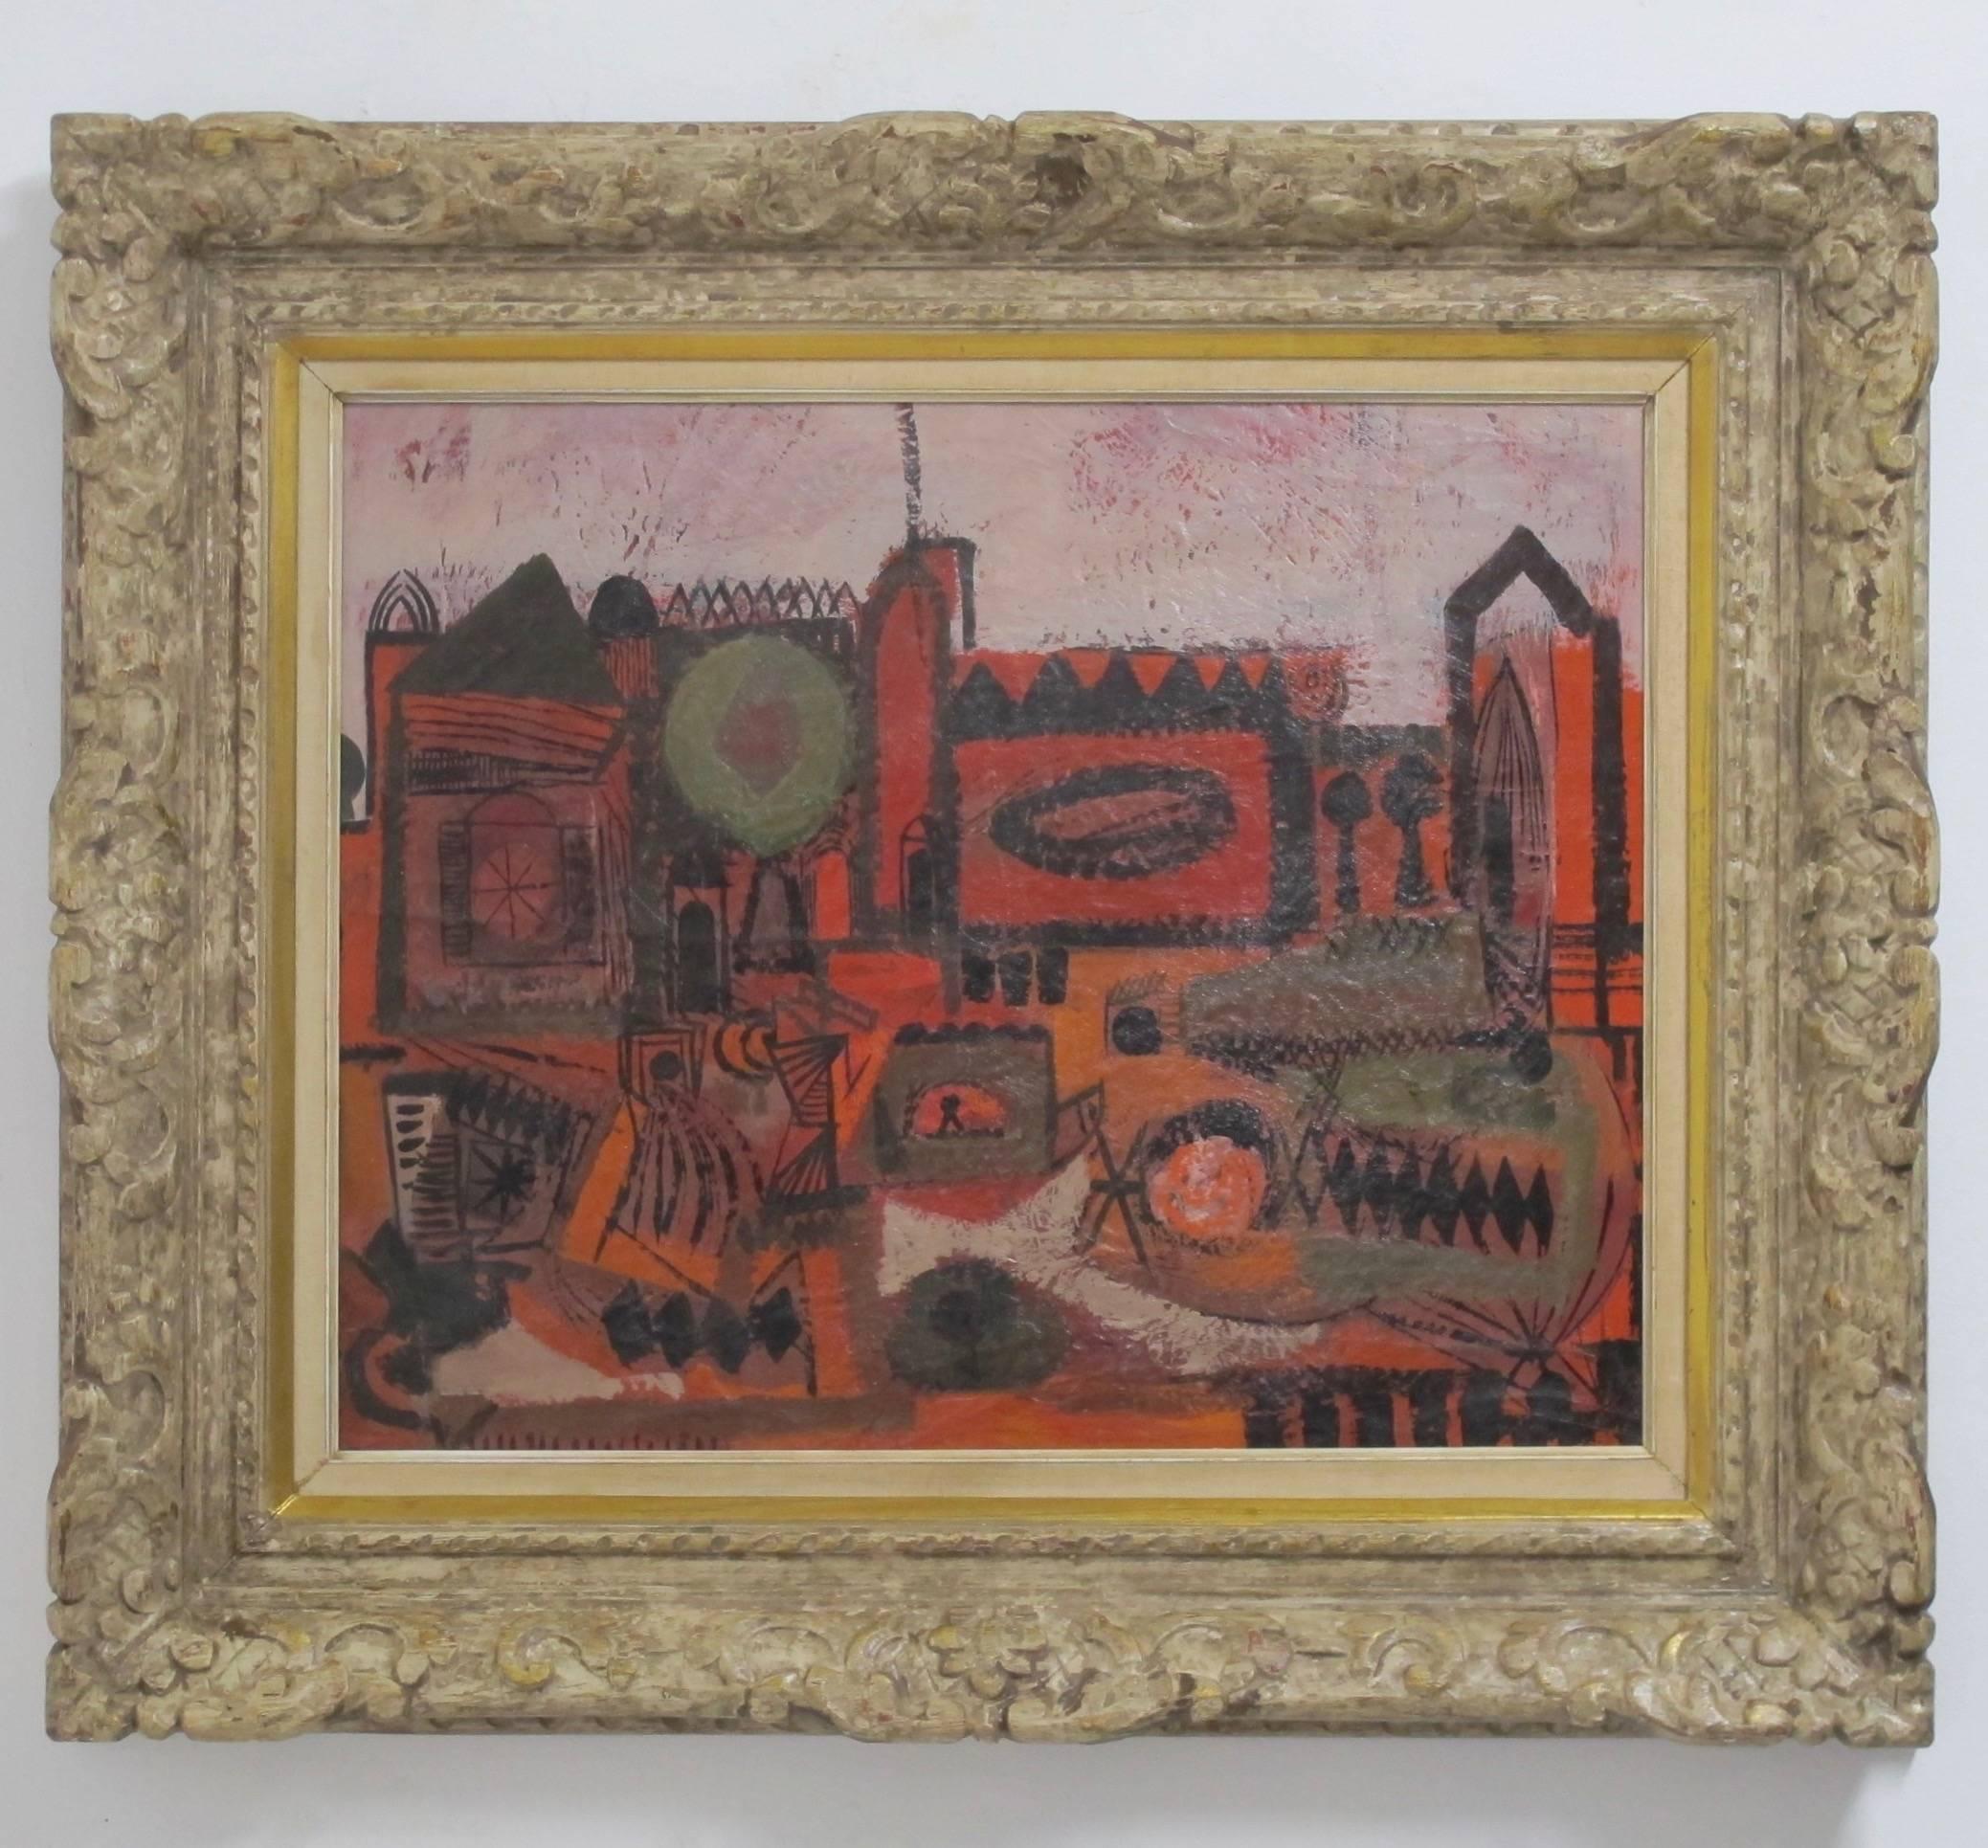 Mid-20th century abstract cityscape painting by California artist Robert Gilbert (b.1911-d.1970). Painted on panel and in original hand-carved frame, exhibition label on back with bio of the artist, American, circa 1960s.
Sight measures 18.5 x 22.5,